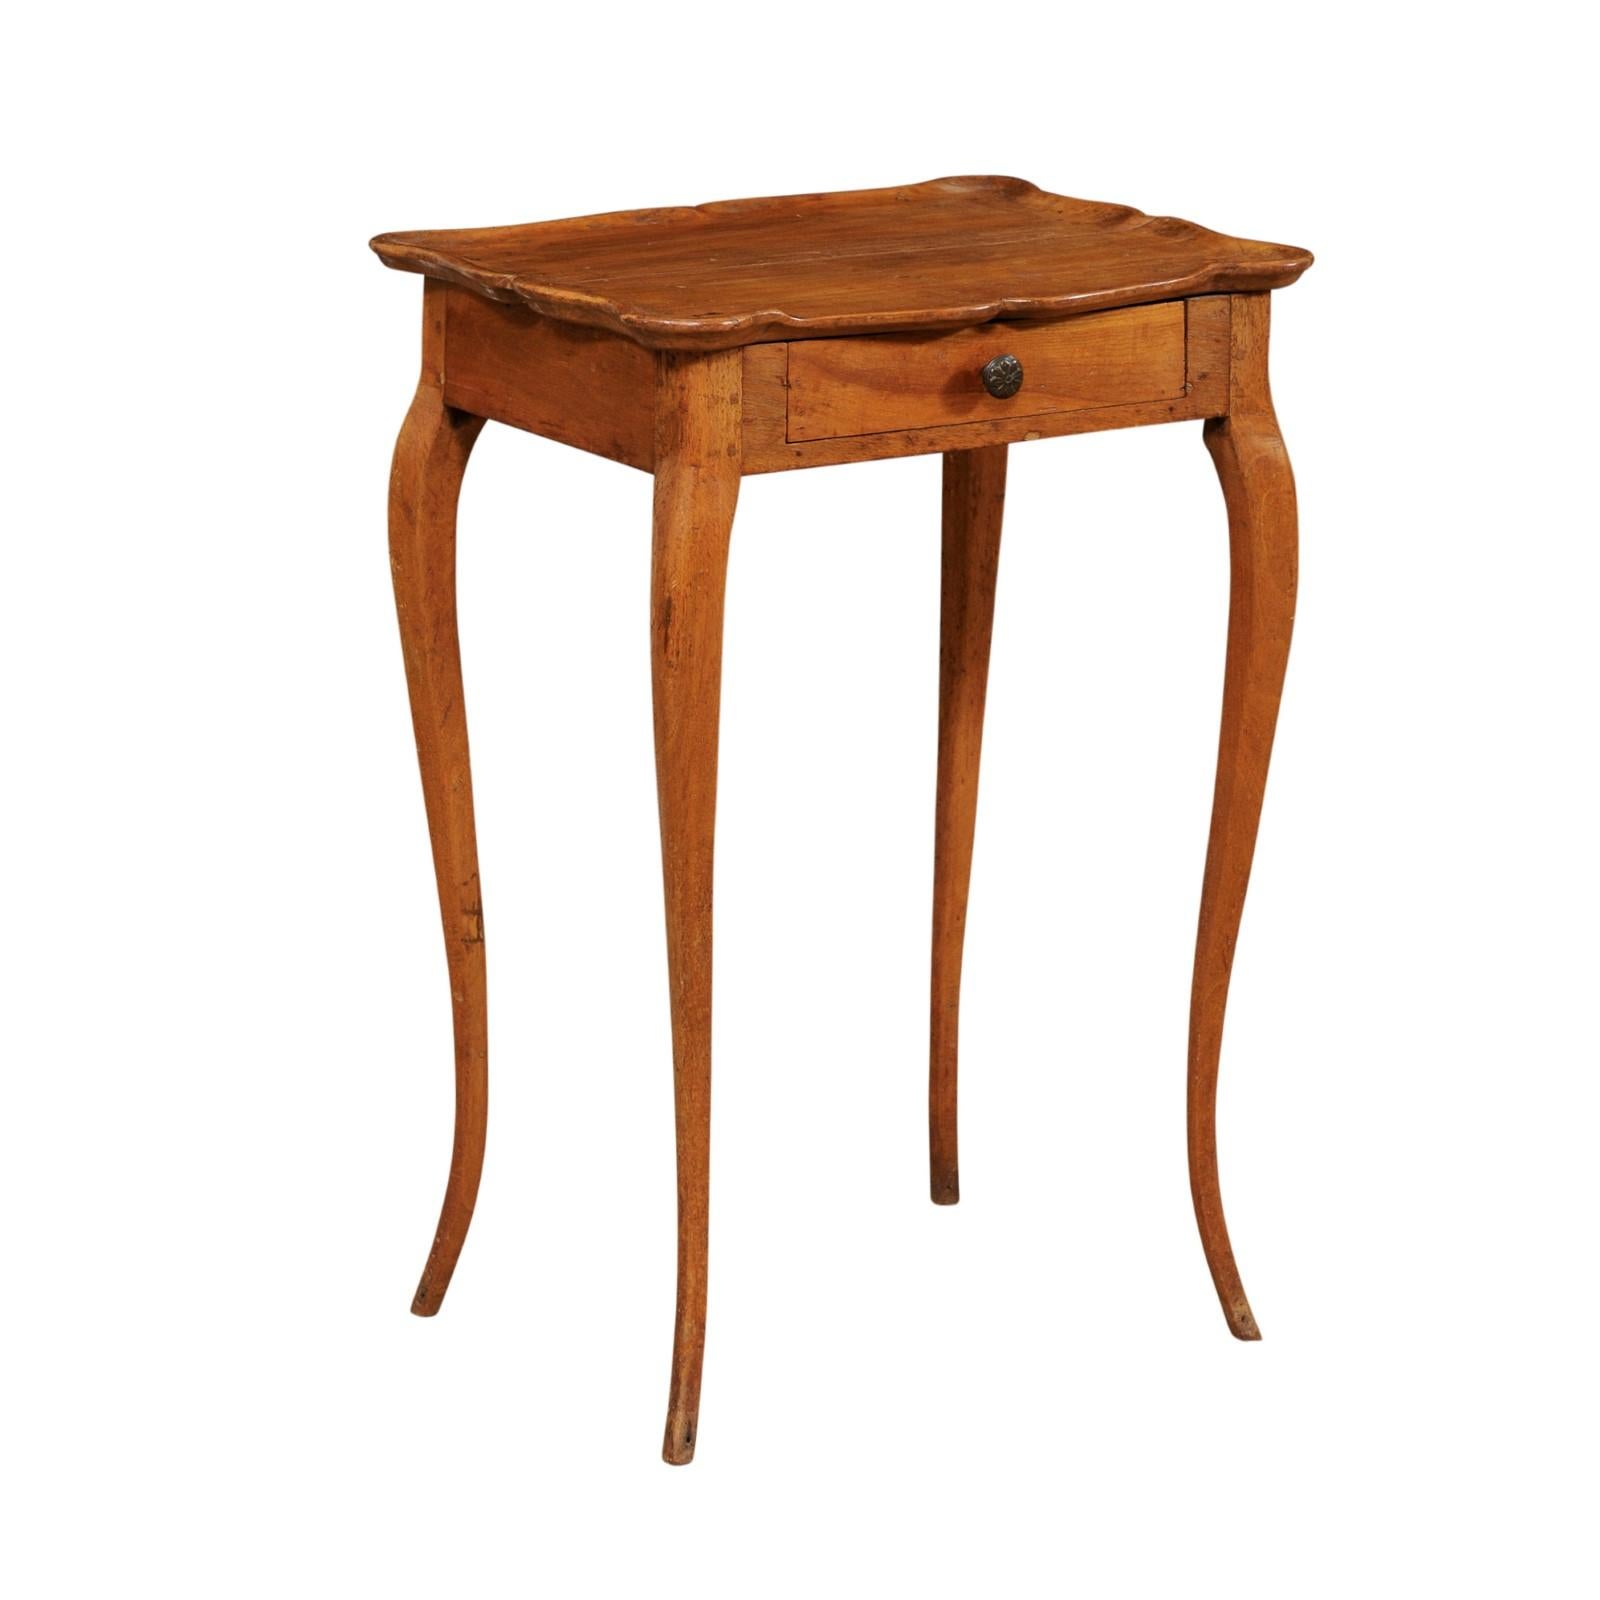 A French side table with single drawer from the early 19th century. This antique table from France features a rectangular-shaped top with sweet scalloped pie-crust edge. The slightly overhanging top rests above a simple apron which houses a single